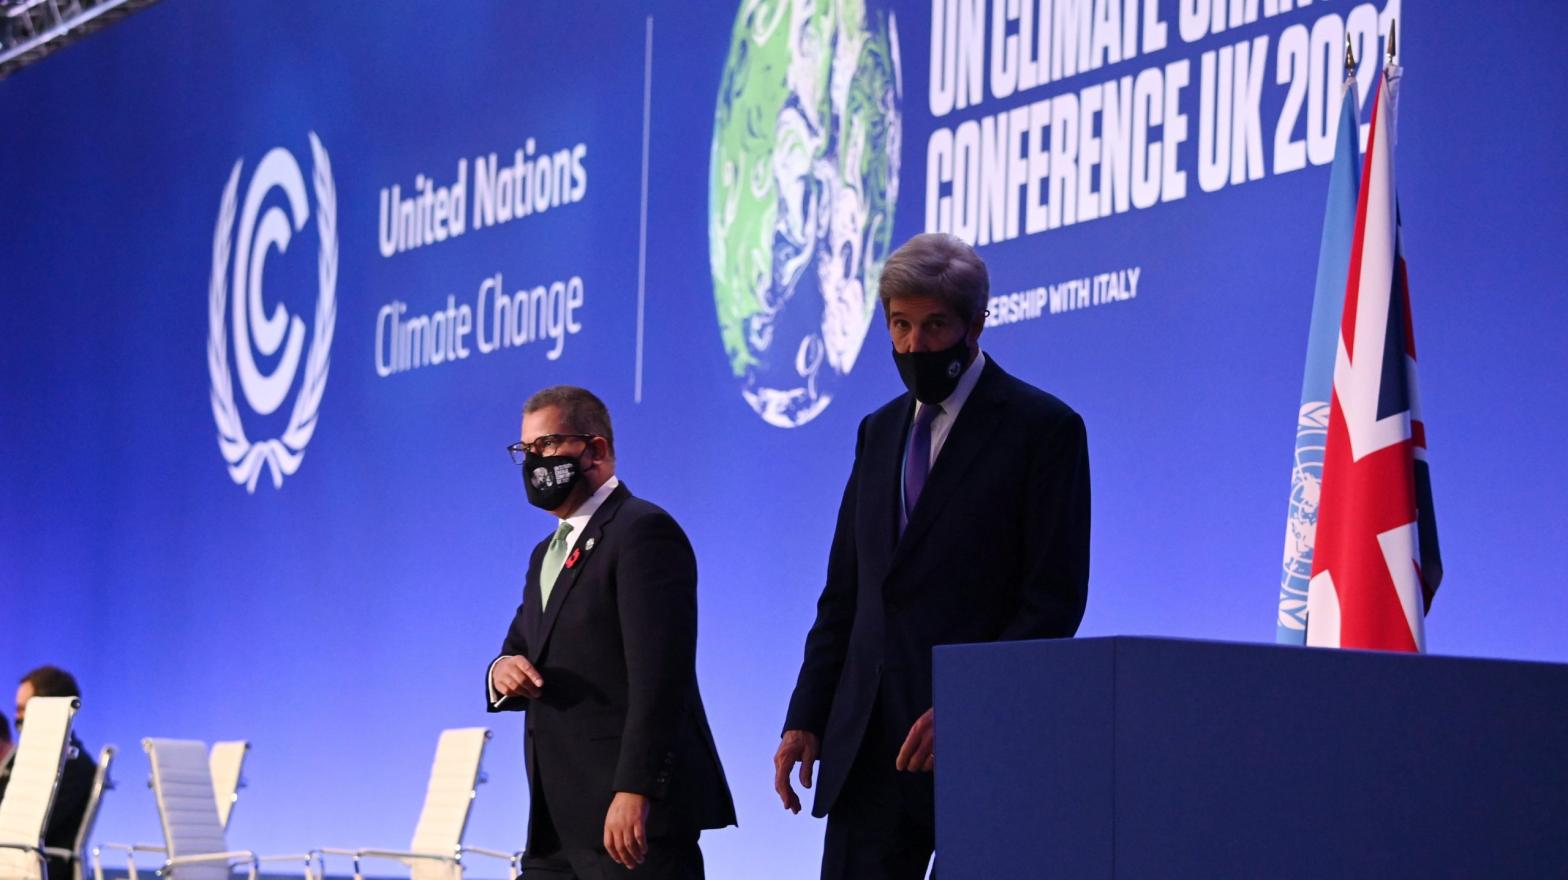 U.S. Special Presidential Envoy for Climate John Kerry (R) with COP26 President Alok Sharma walking off stage. (Photo: Jeff J. Mitchell, Getty Images)